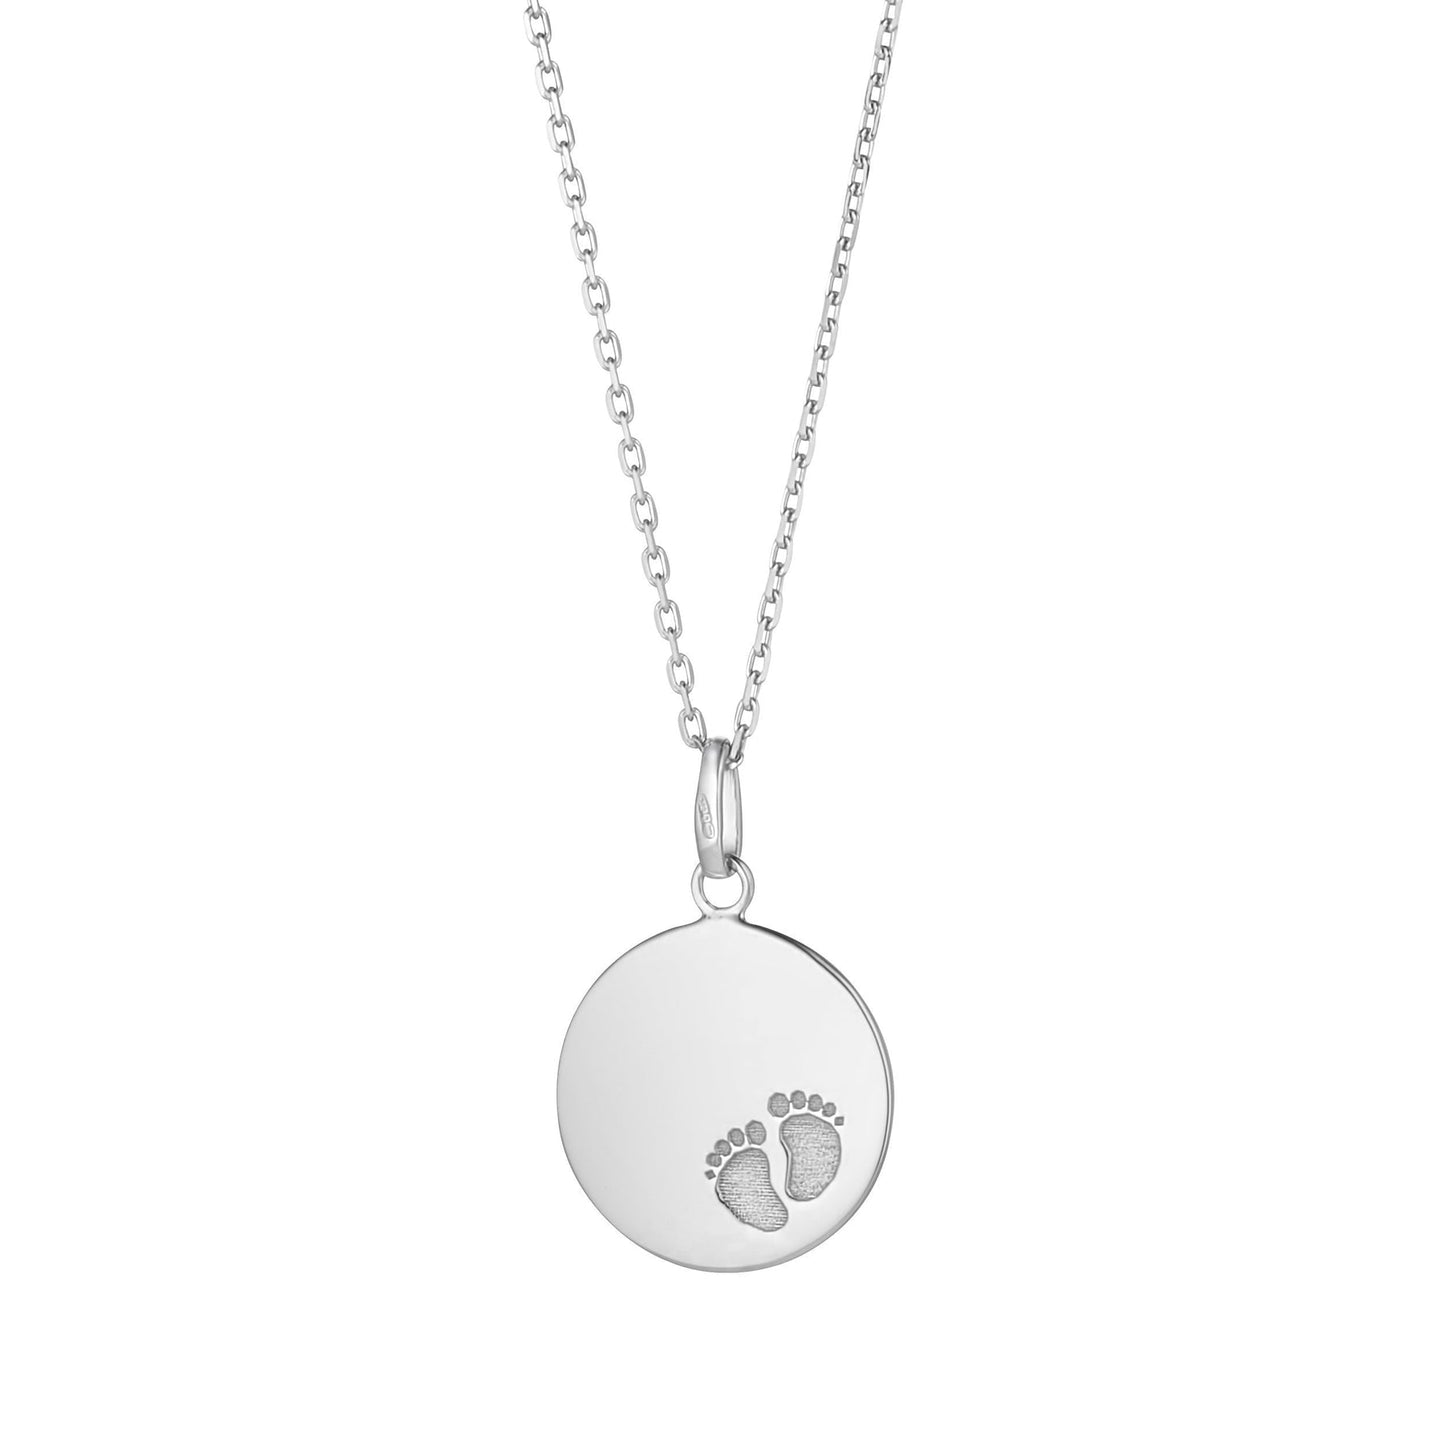 STERLING SILVER BABY FOOTPRINT SOLID DISC PENDANT - A & M News and Gifts